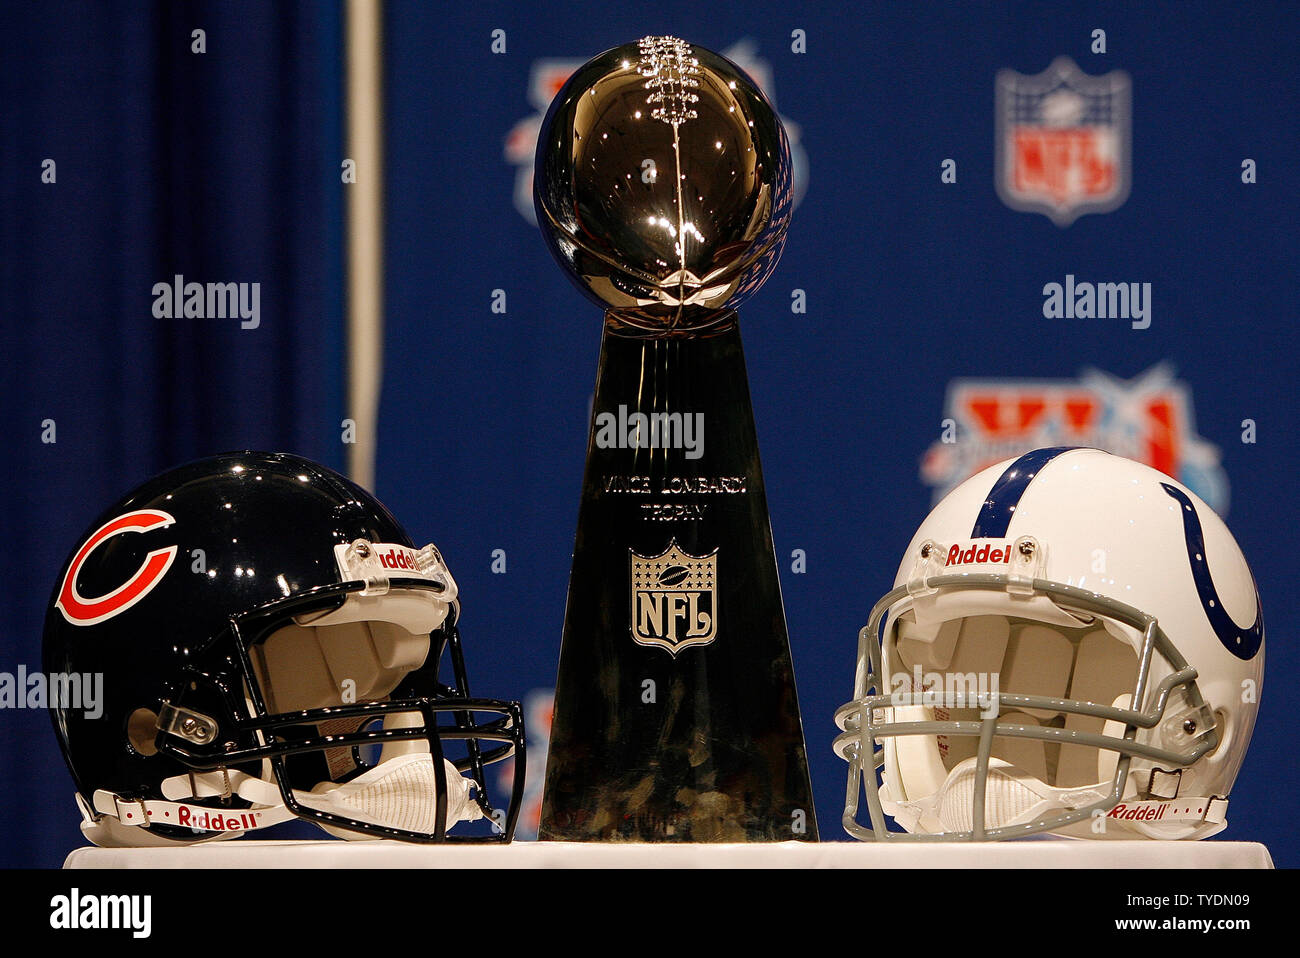 The Superbowl's Vince Lombardi trophy stands between the Chicago